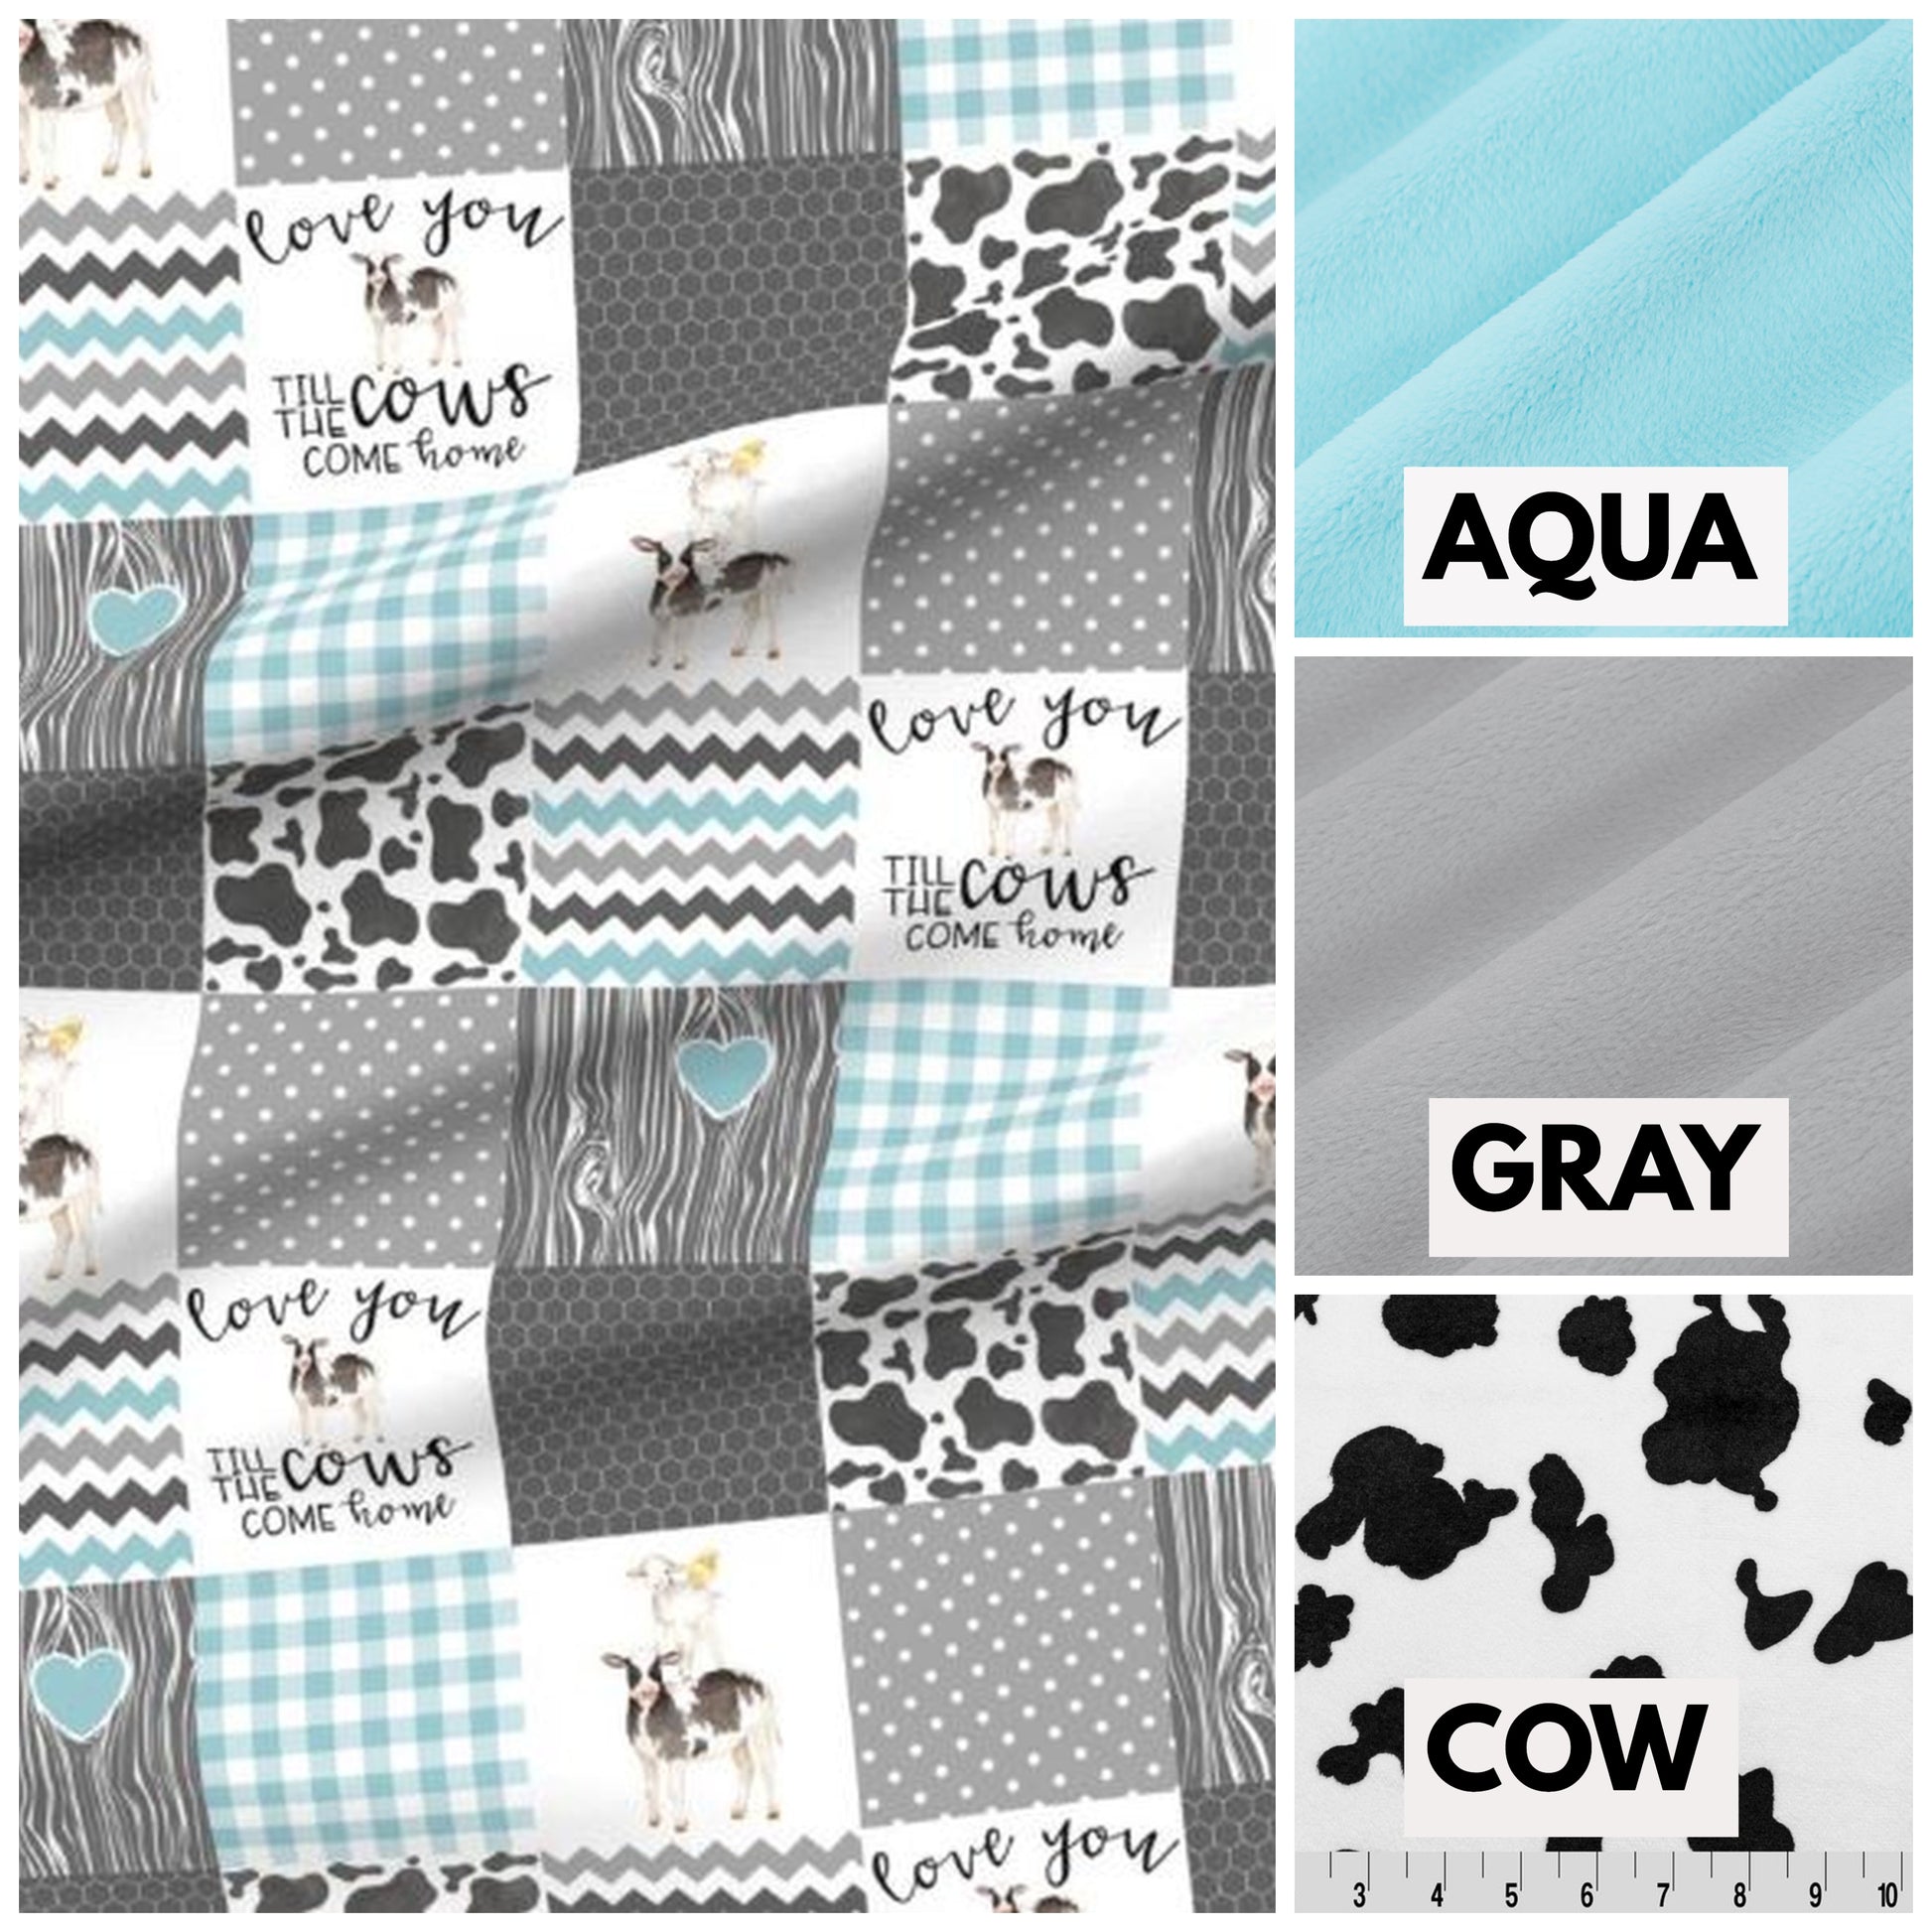 aqua, gray or cow print for the back of the blanket